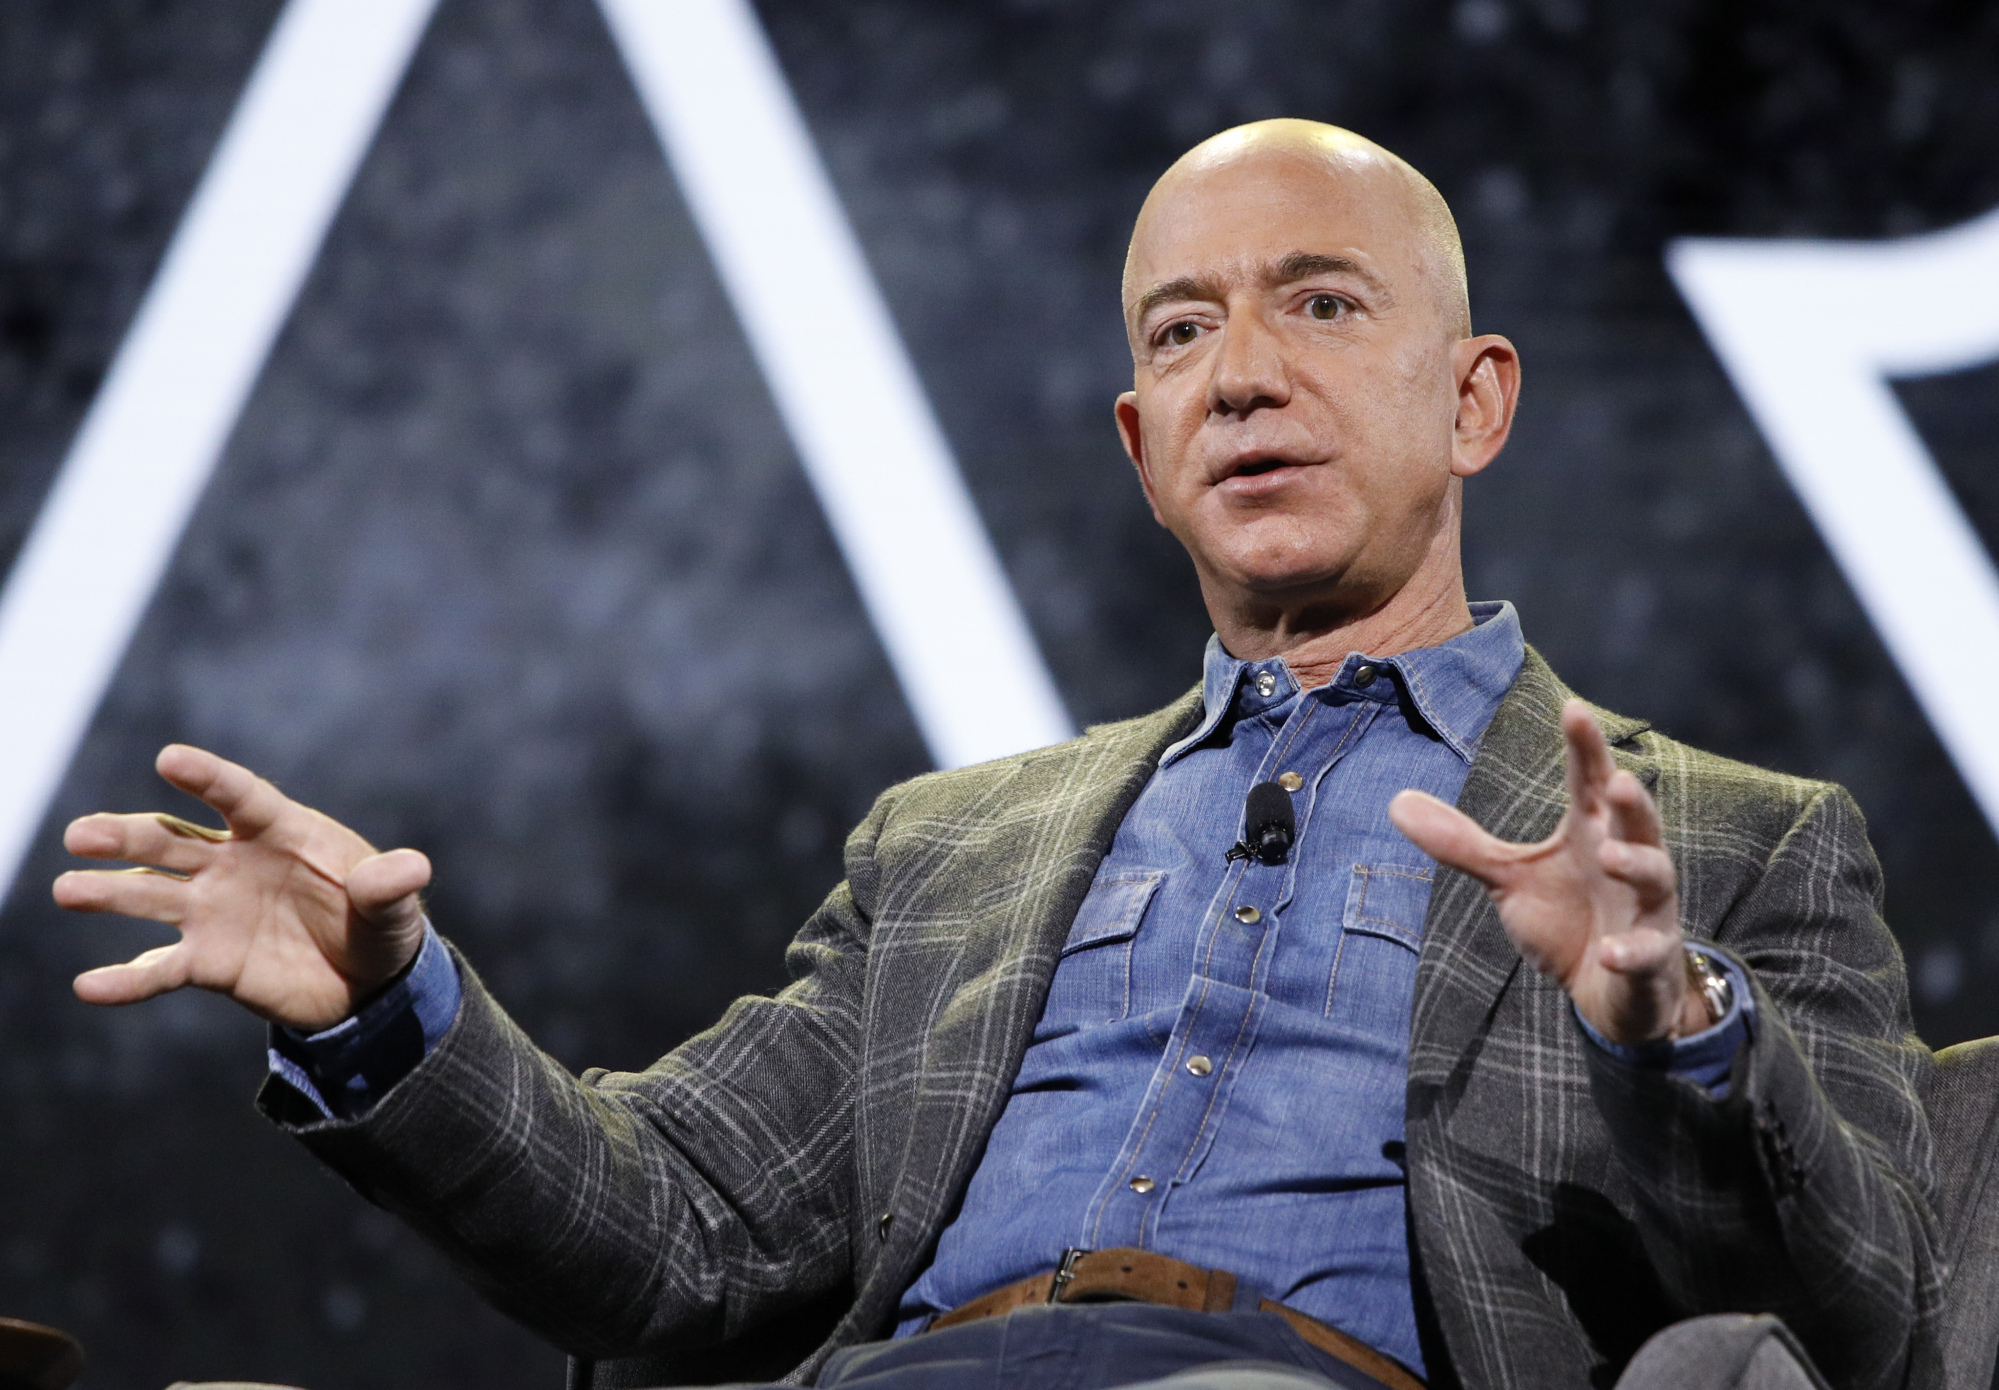 Jeff Bezos, Other Tech Execs Held Italy Summit With Brunello Cucinelli